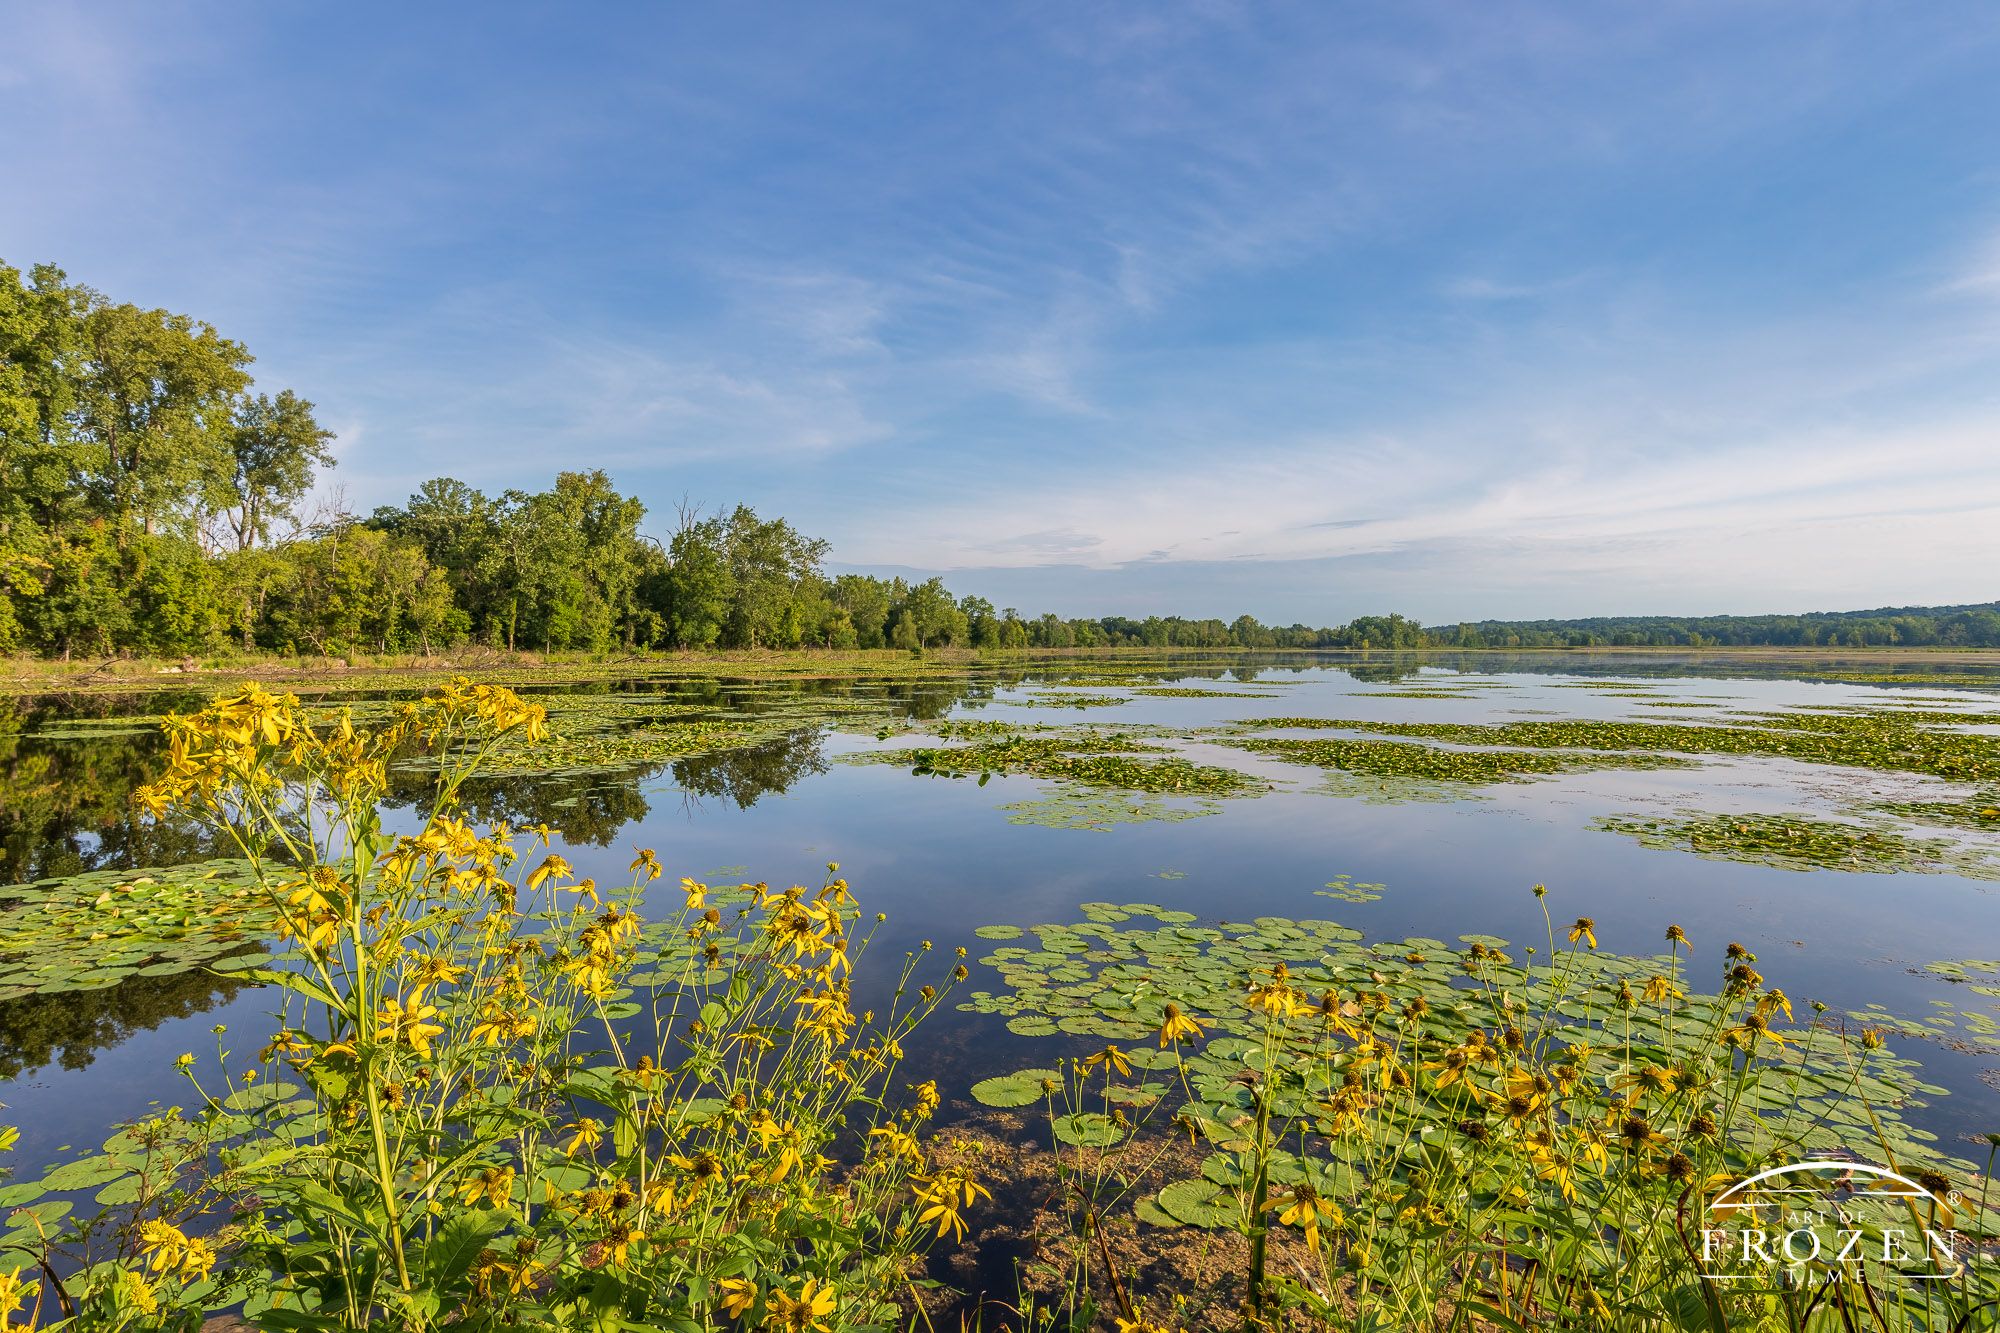 A morning image of an Ohio marsh were the still surface waters form a perfect reflection of the blue sky and surround green vegetation